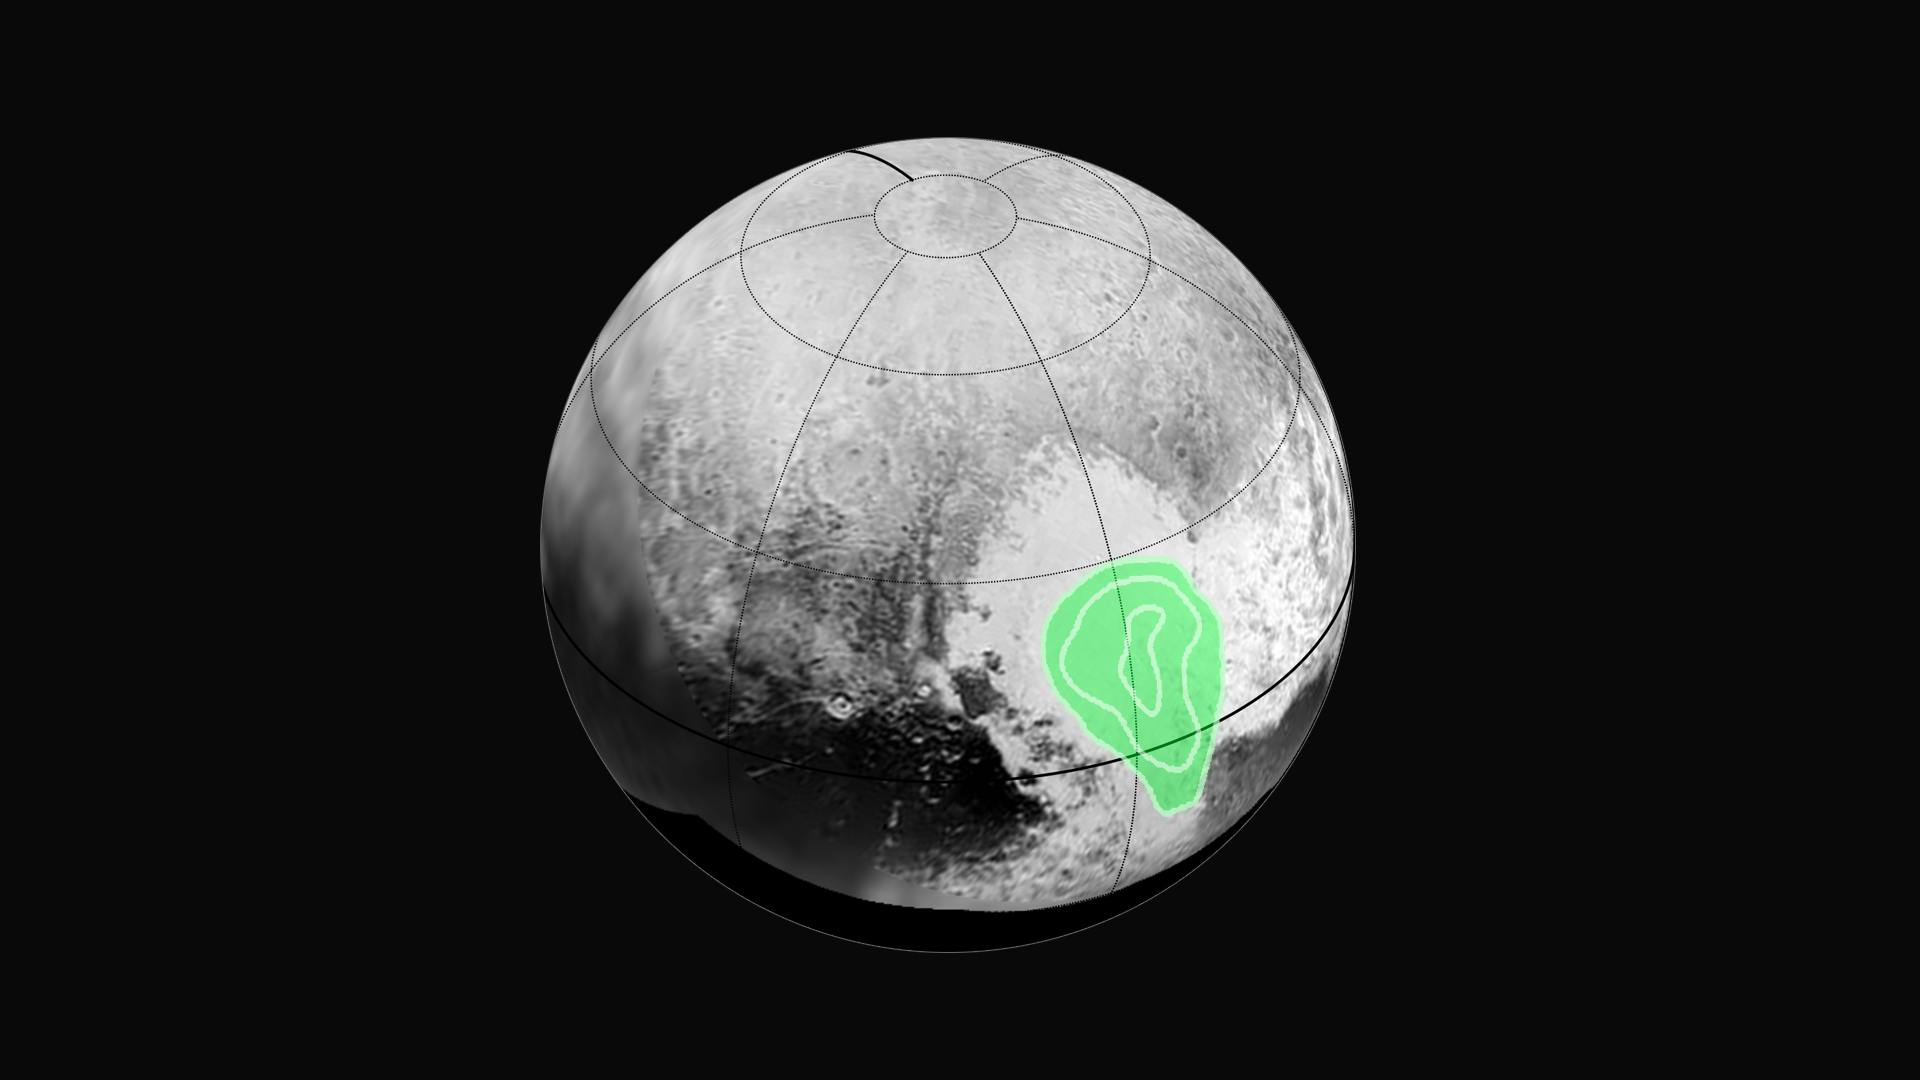 NASA shows frozen carbon monoxide layer in Pluto's "heart" highlighted in green.